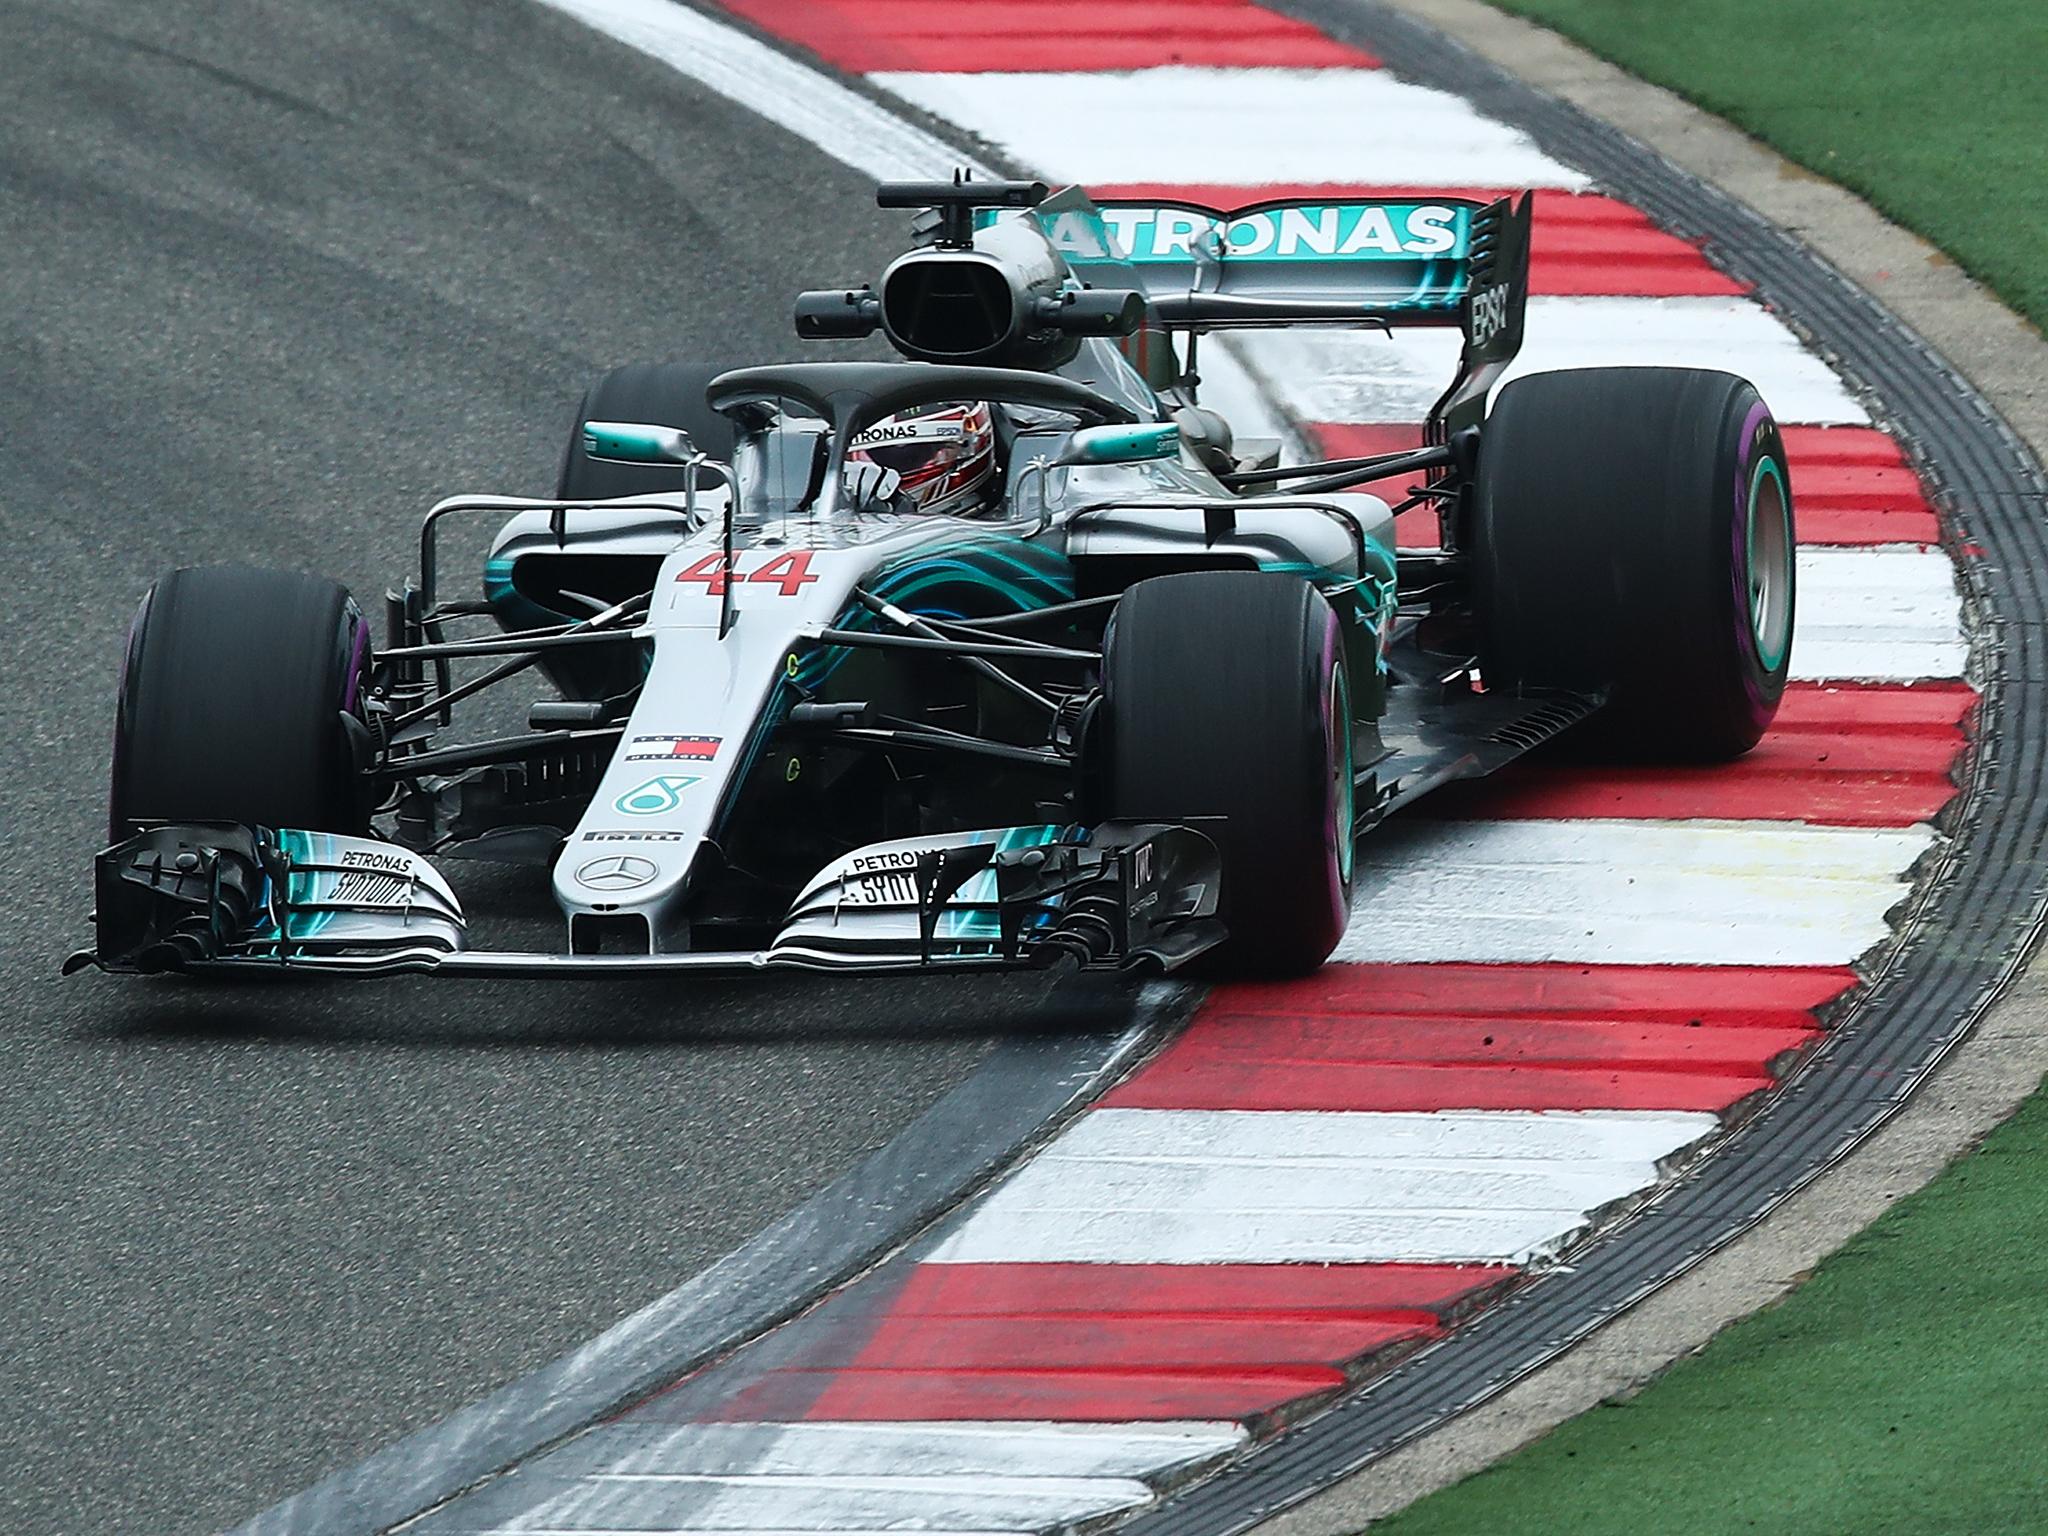 Hamilton struggled with rear grip and spun in practice on Saturday